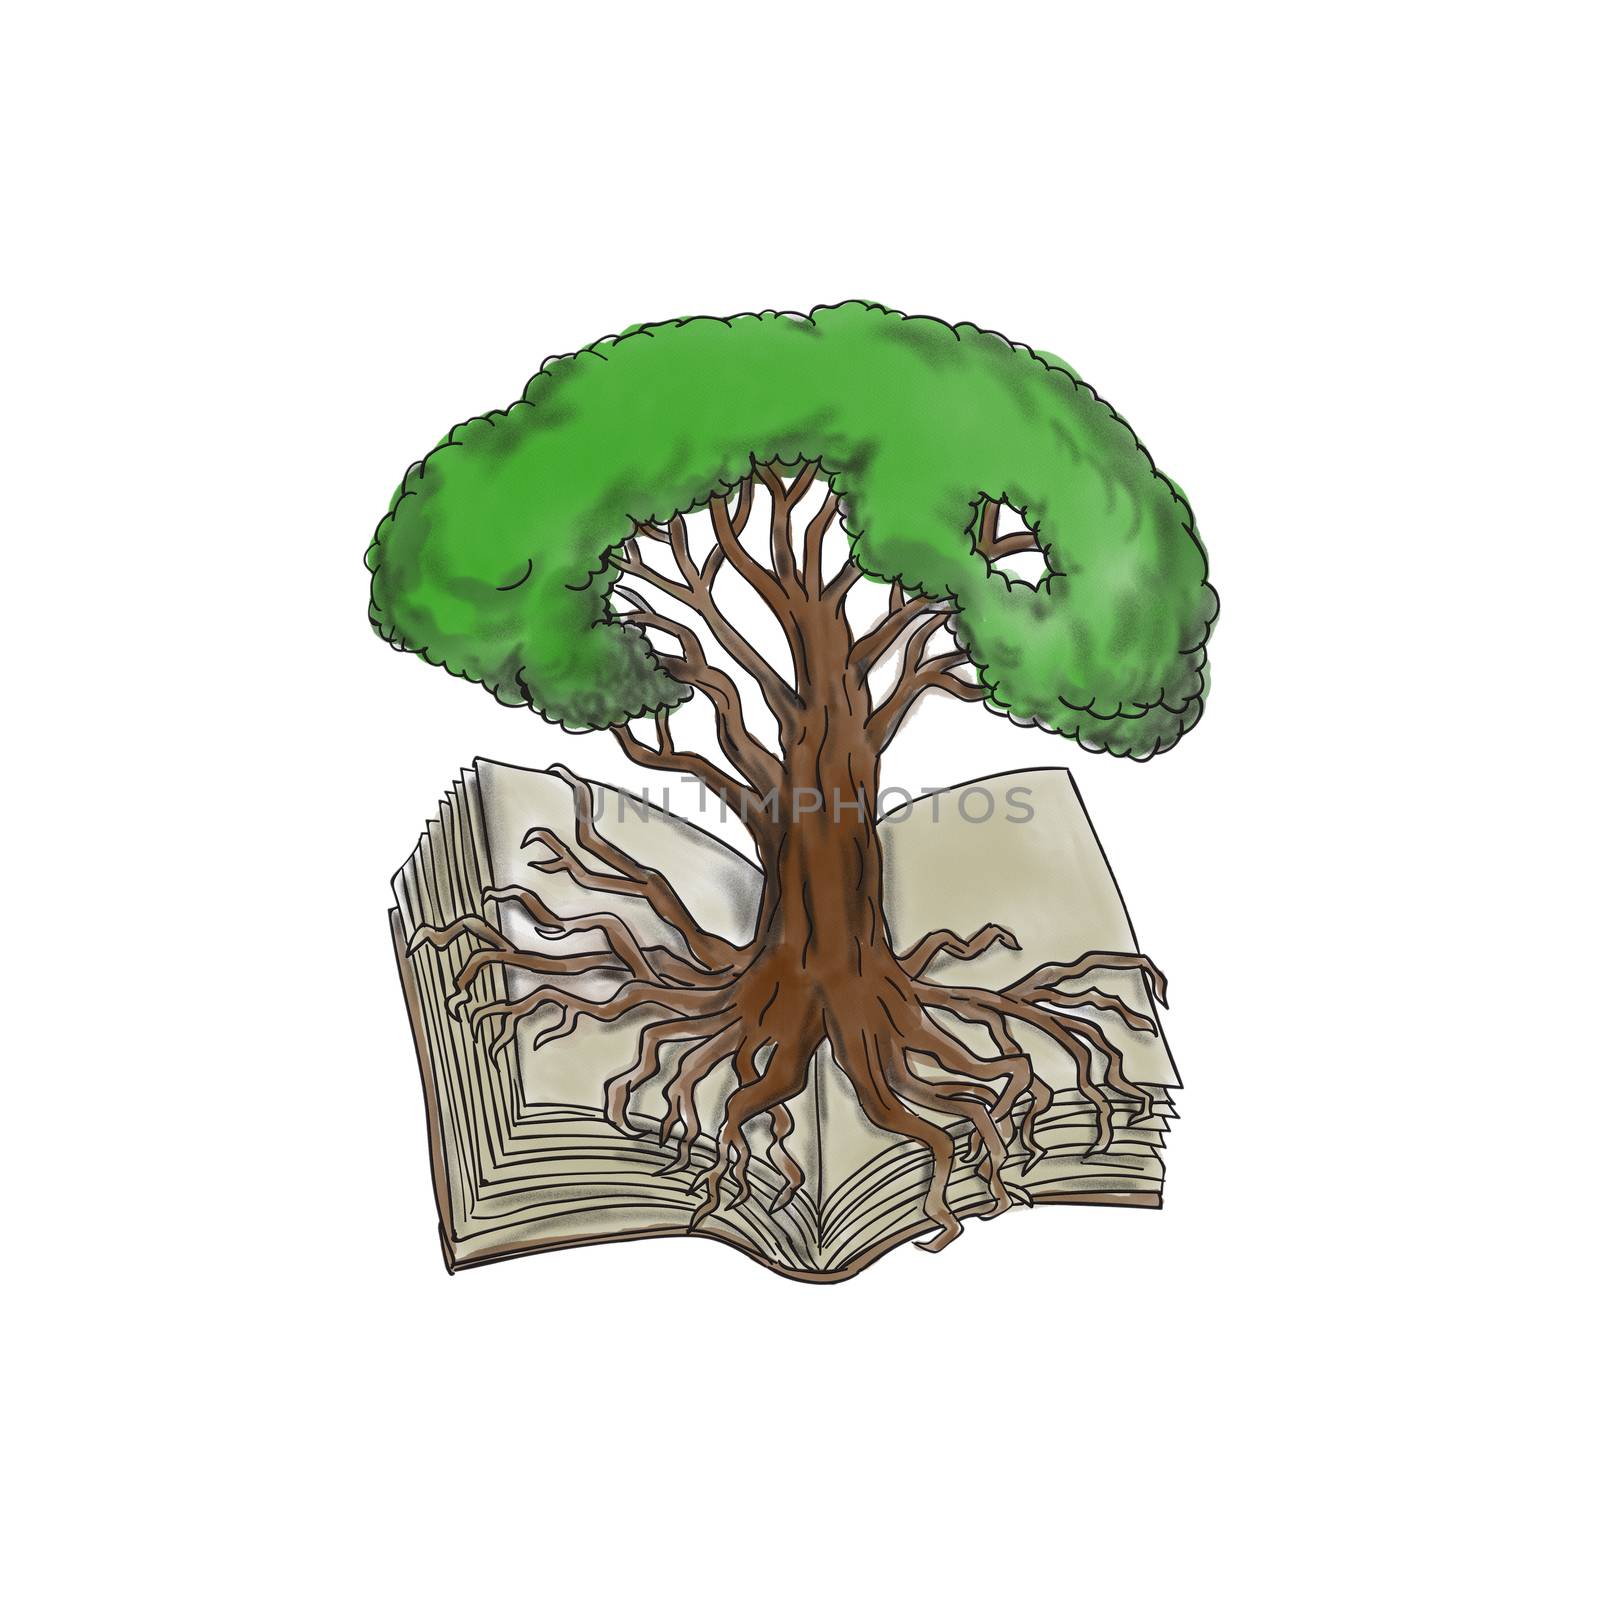 Tattoo style illustration of a tree rooted on book set on isolated white background. 